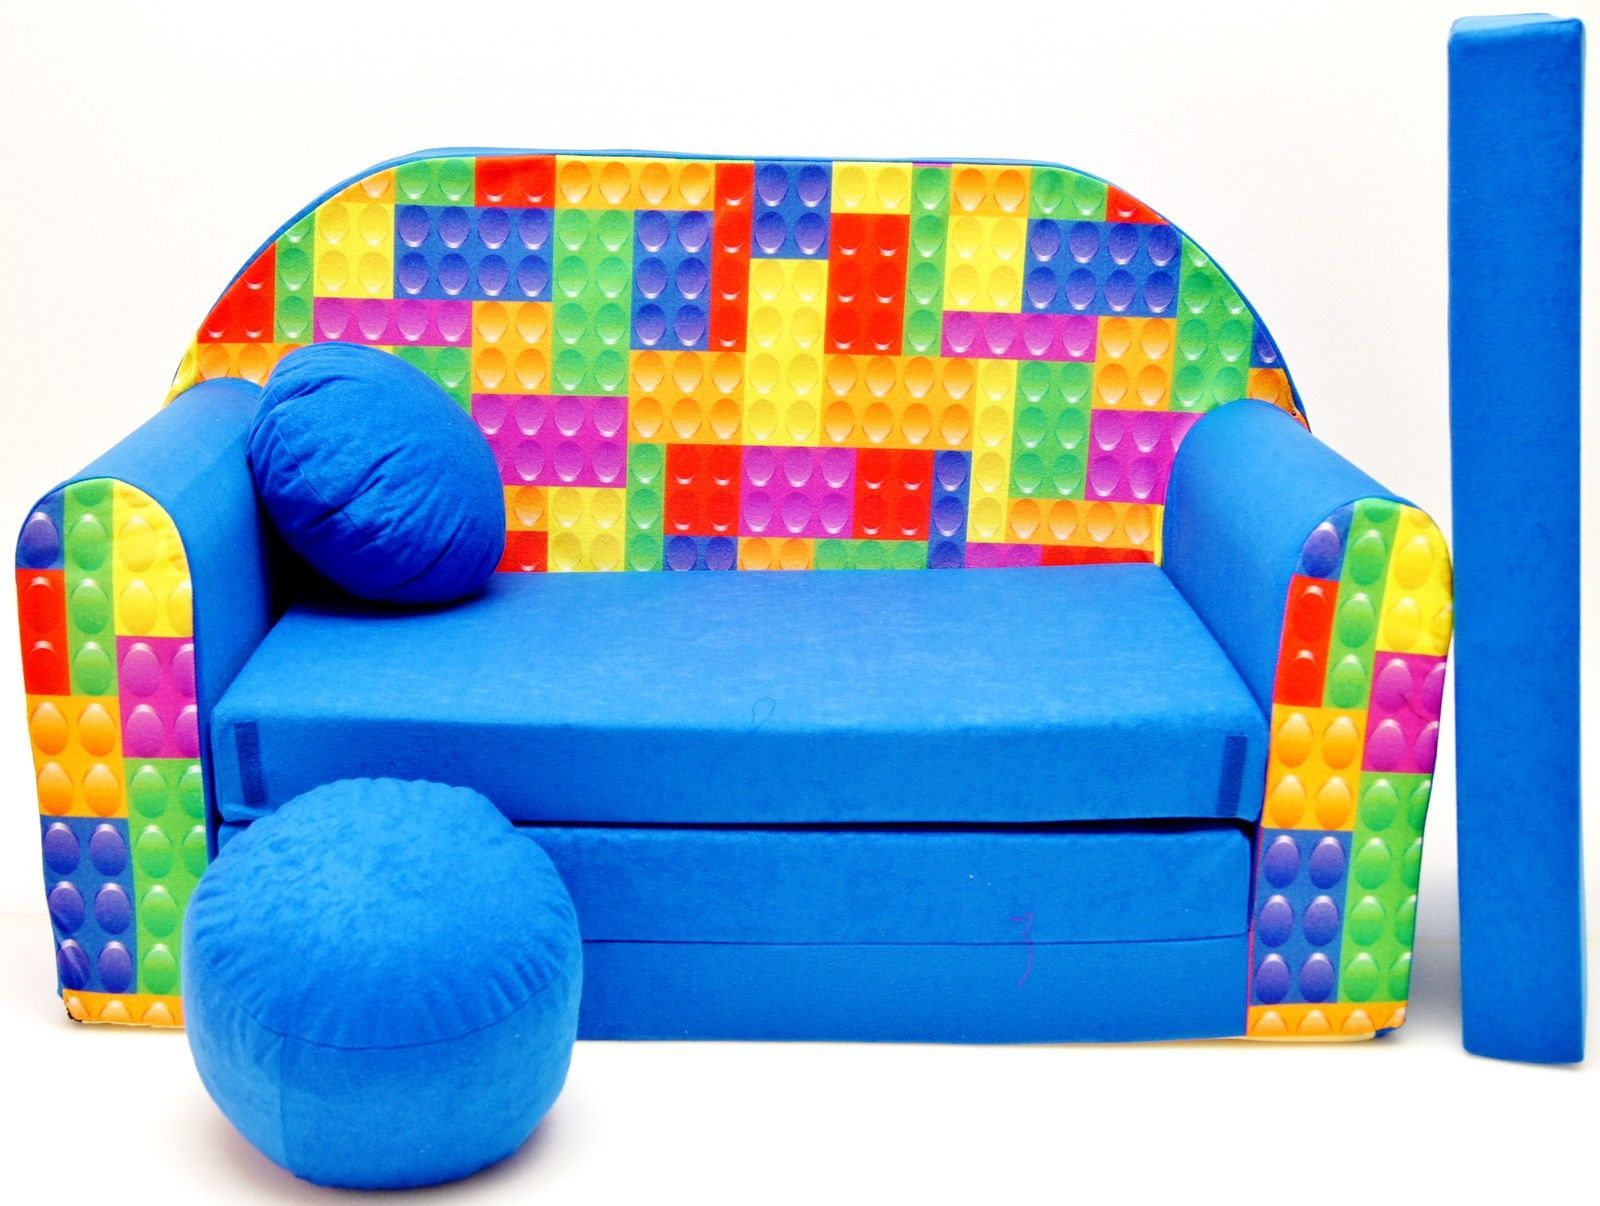 Childrens Sofa Bed Type W, Fold Out Sofa Foam Bed For Children + Free  Pillow And Pouffe – Wc32 – Ppg4kids.co (View 4 of 15)